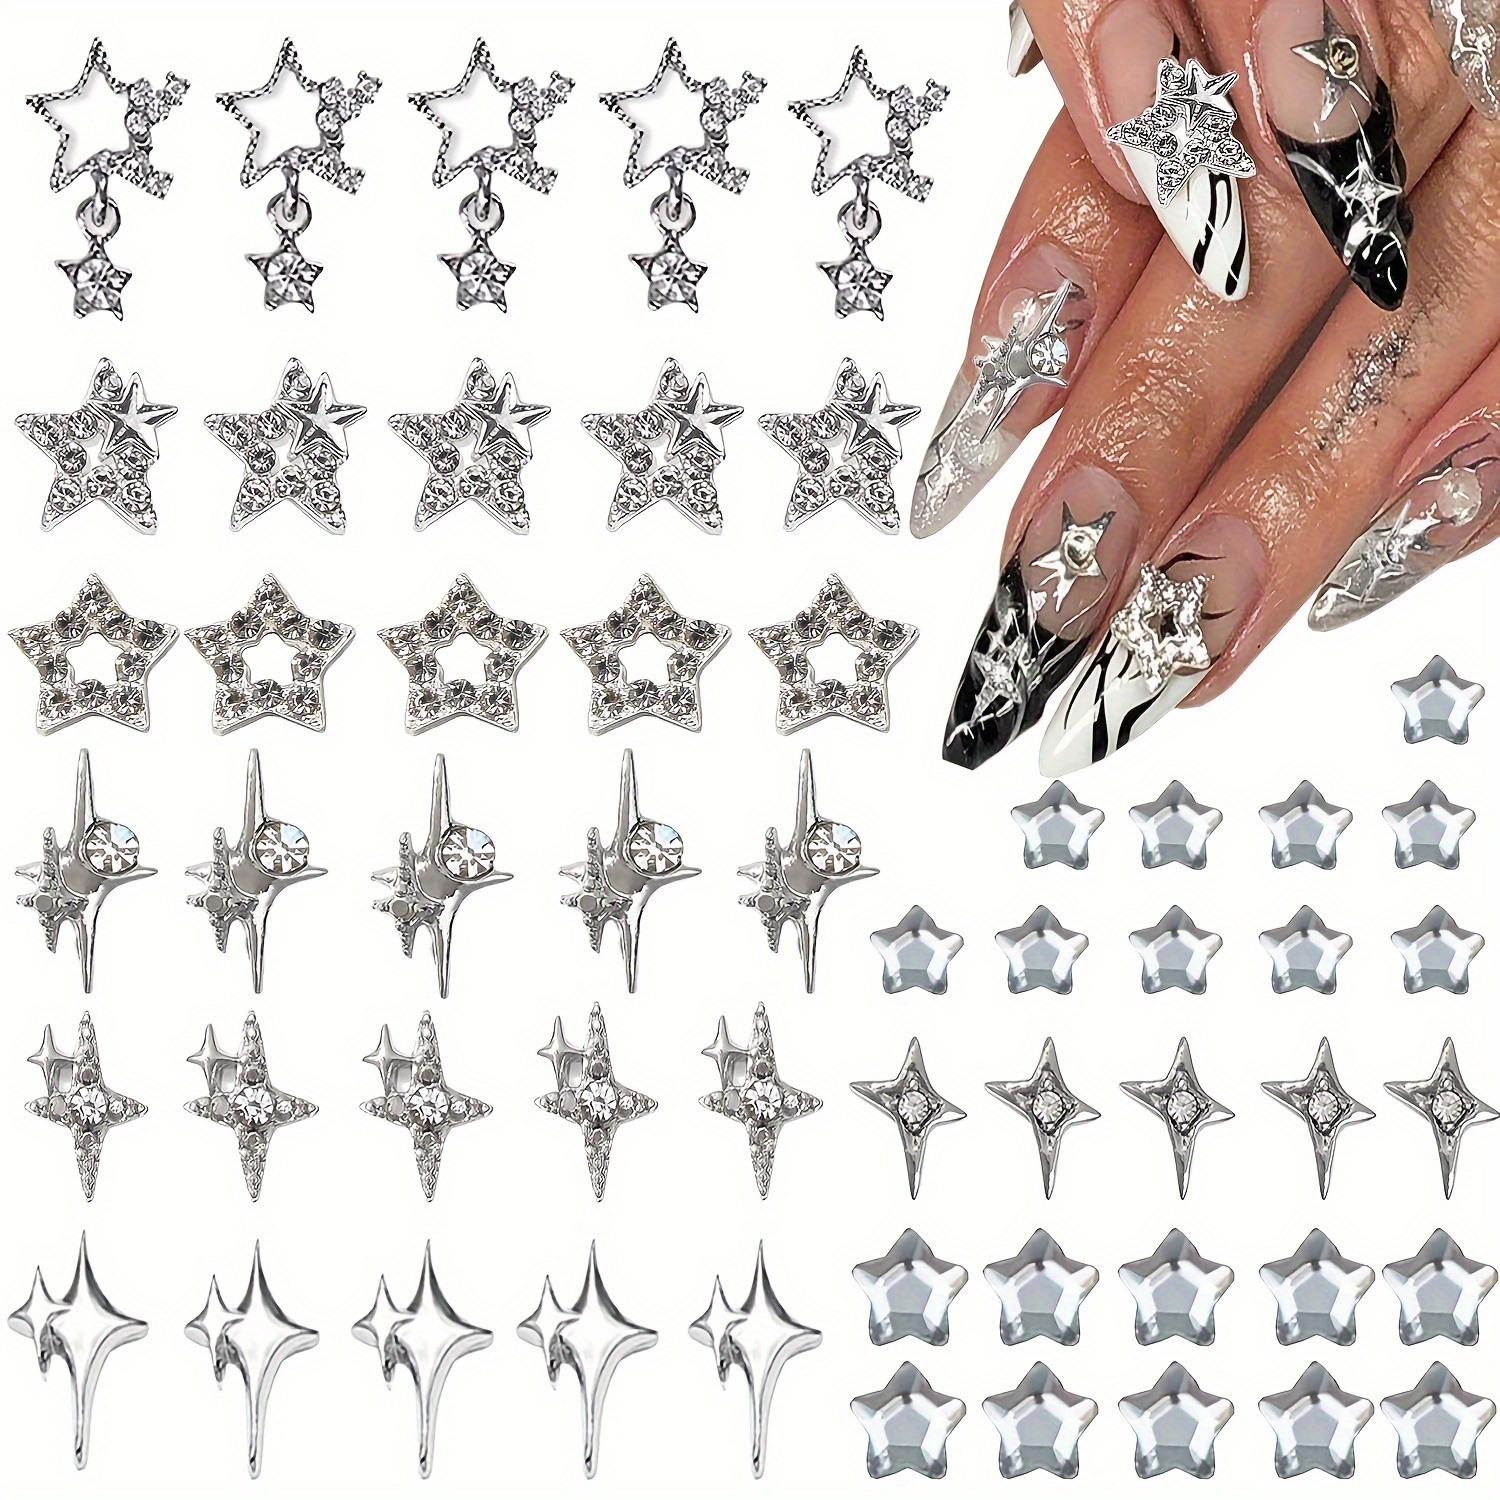 

55-piece Silver Star Nail Charms Set - 3d Alloy Rhinestones For Acrylic Nails, Y2k Inspired Nail Art Decorations, Odorless - Perfect For Women & Girls (9 Styles)